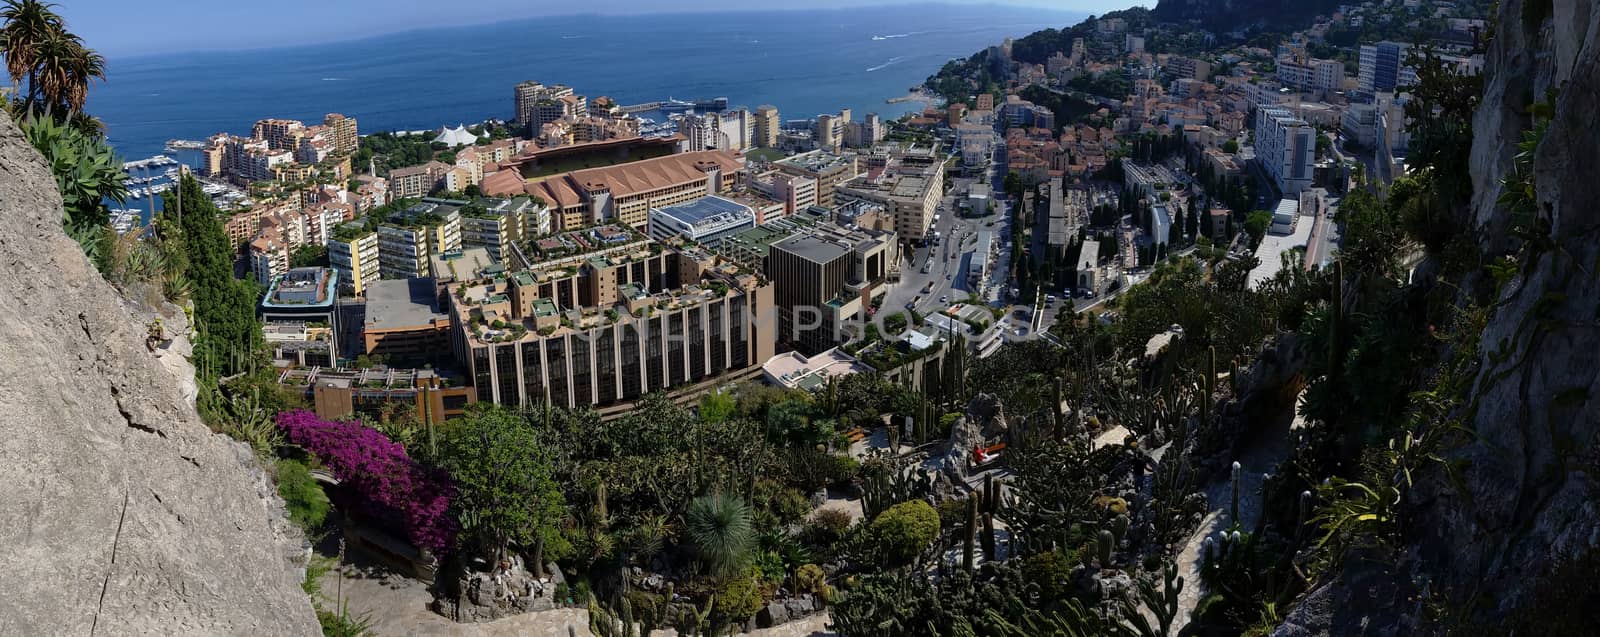 Fontvieille District in Monaco - Panoramic Picture by bensib